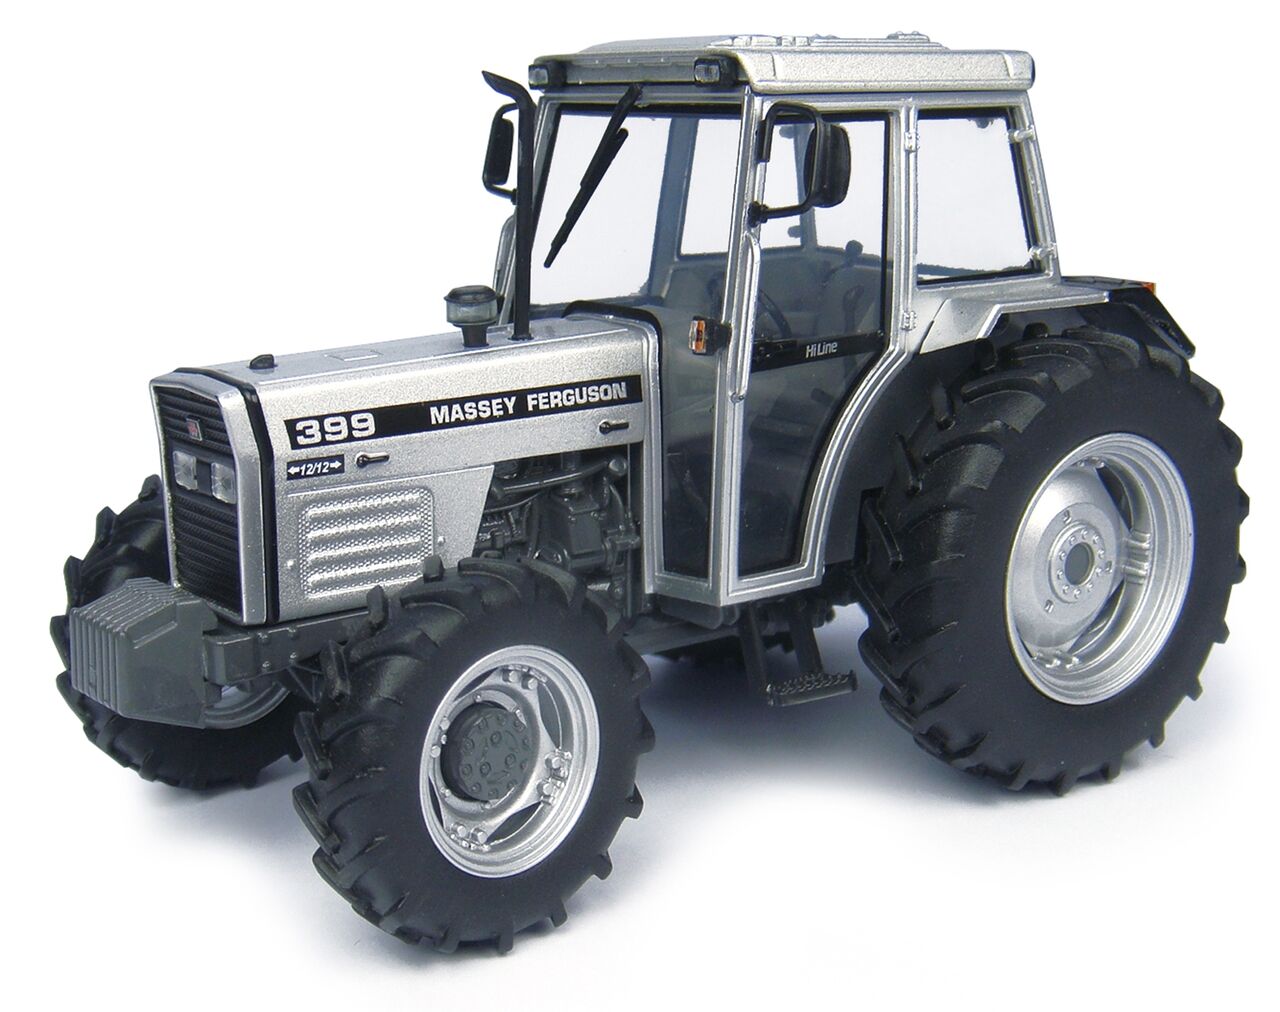 Massey Ferguson 399 Tractor Silver Edition 50th Anniversary of Tractor Production at Coventry Limited Edition to 1500 pieces Worldwide 1/32 Diecast Model by Universal Hobbies